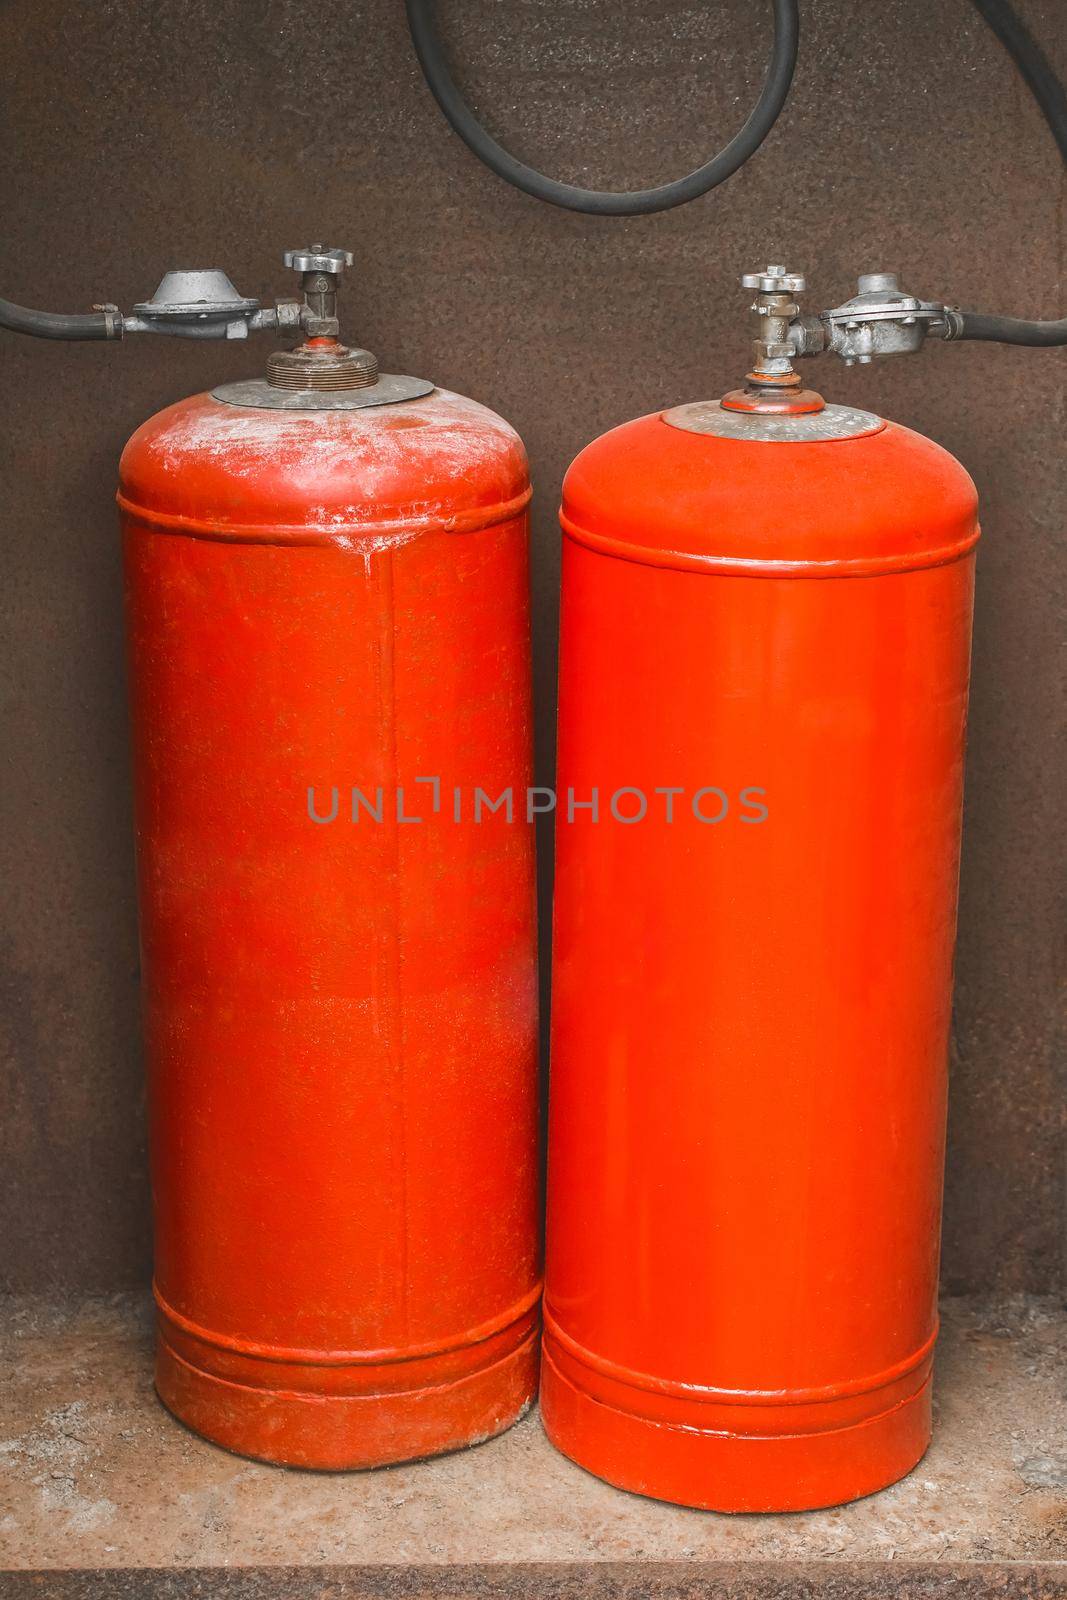 System for connecting two gas cylinders in the gas box of a residential building.